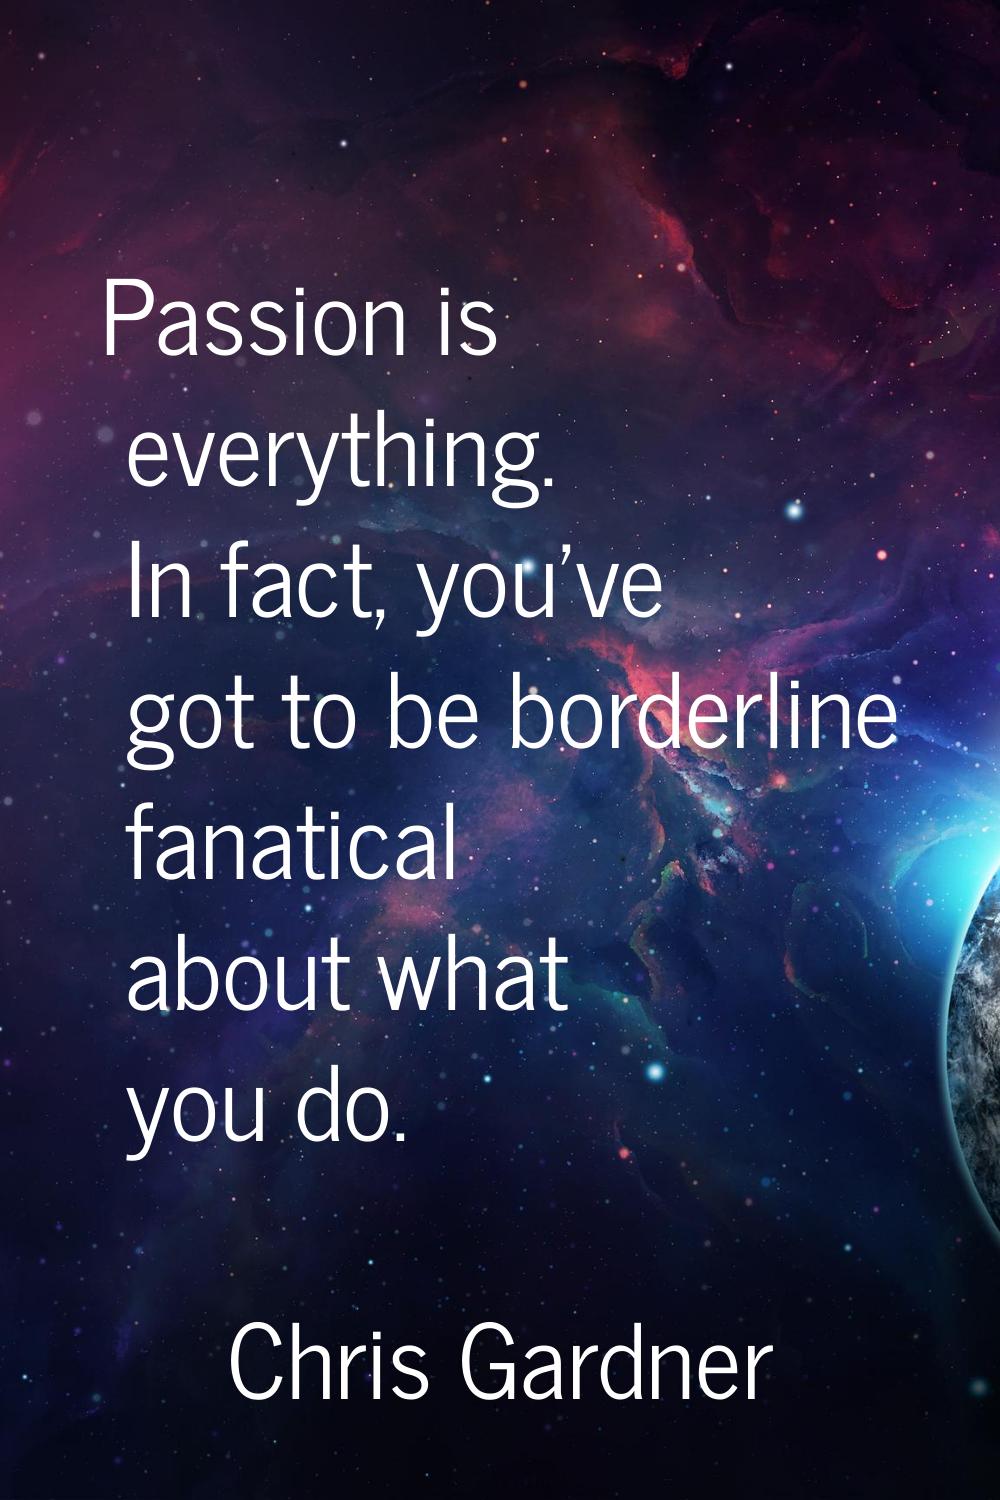 Passion is everything. In fact, you've got to be borderline fanatical about what you do.